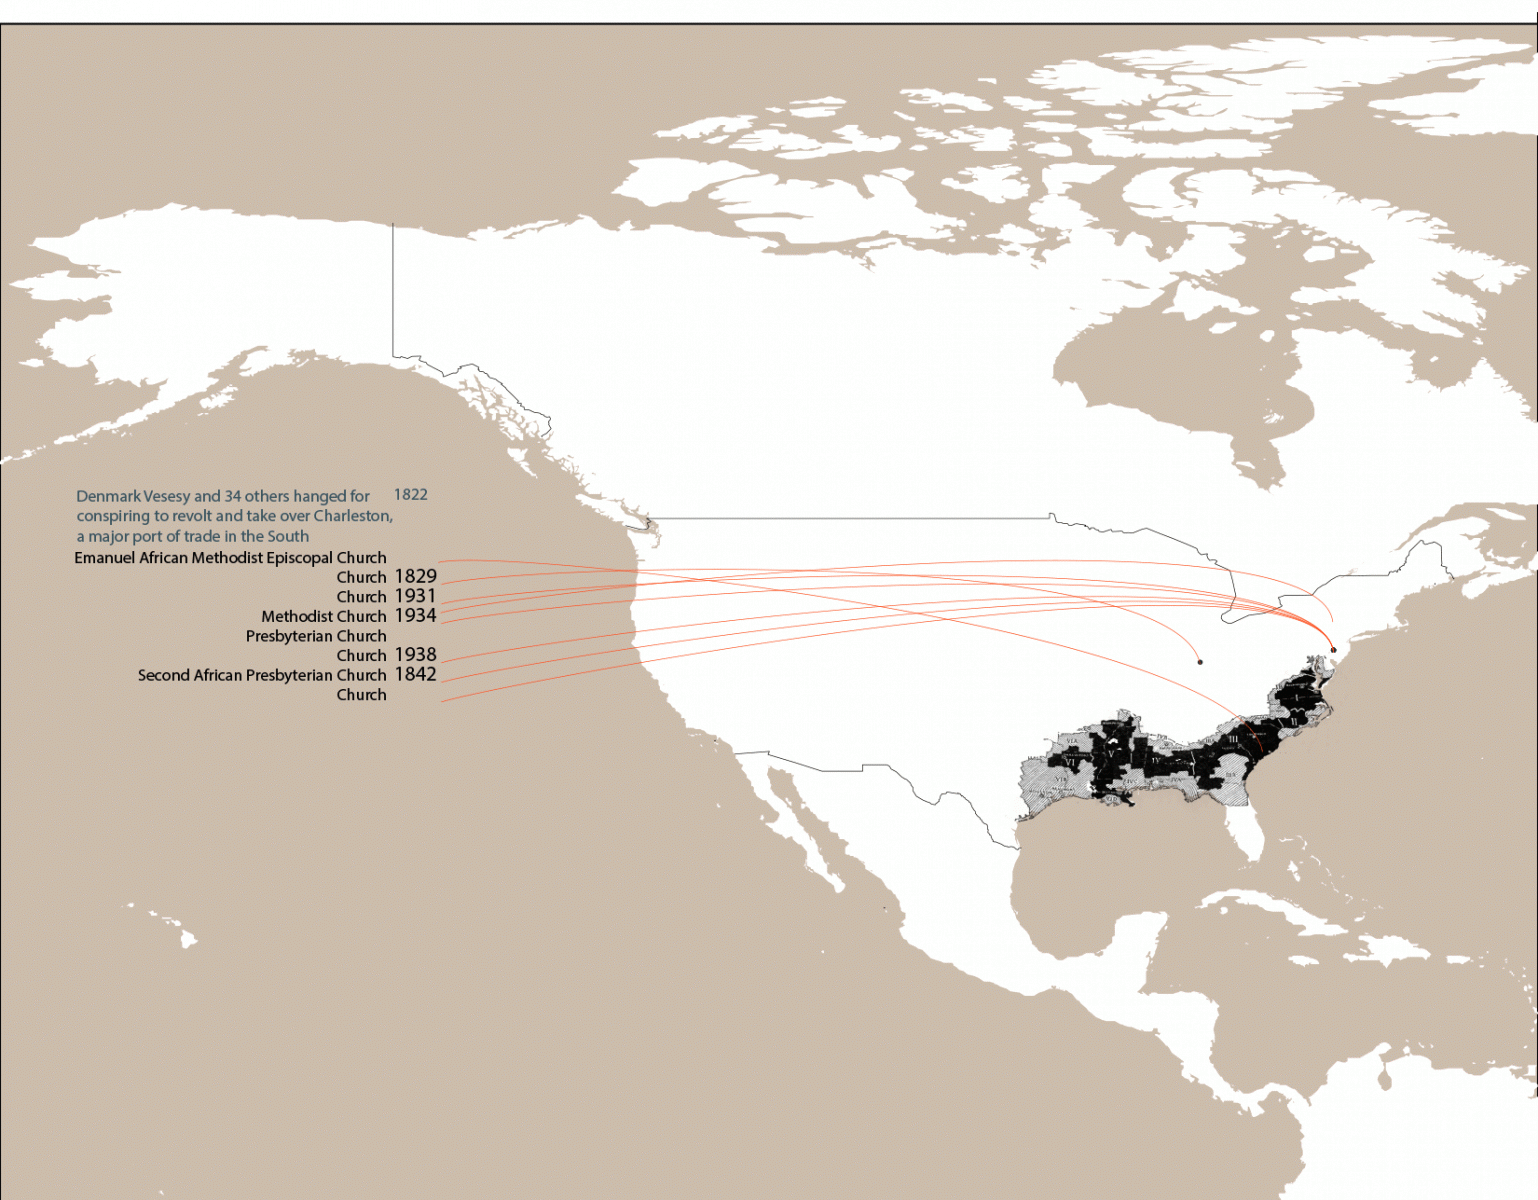 Beige and white infographic map of North America, with the south eastern states highlighted in grey and black. Thin red lines connect dates to various locations along the east coast.